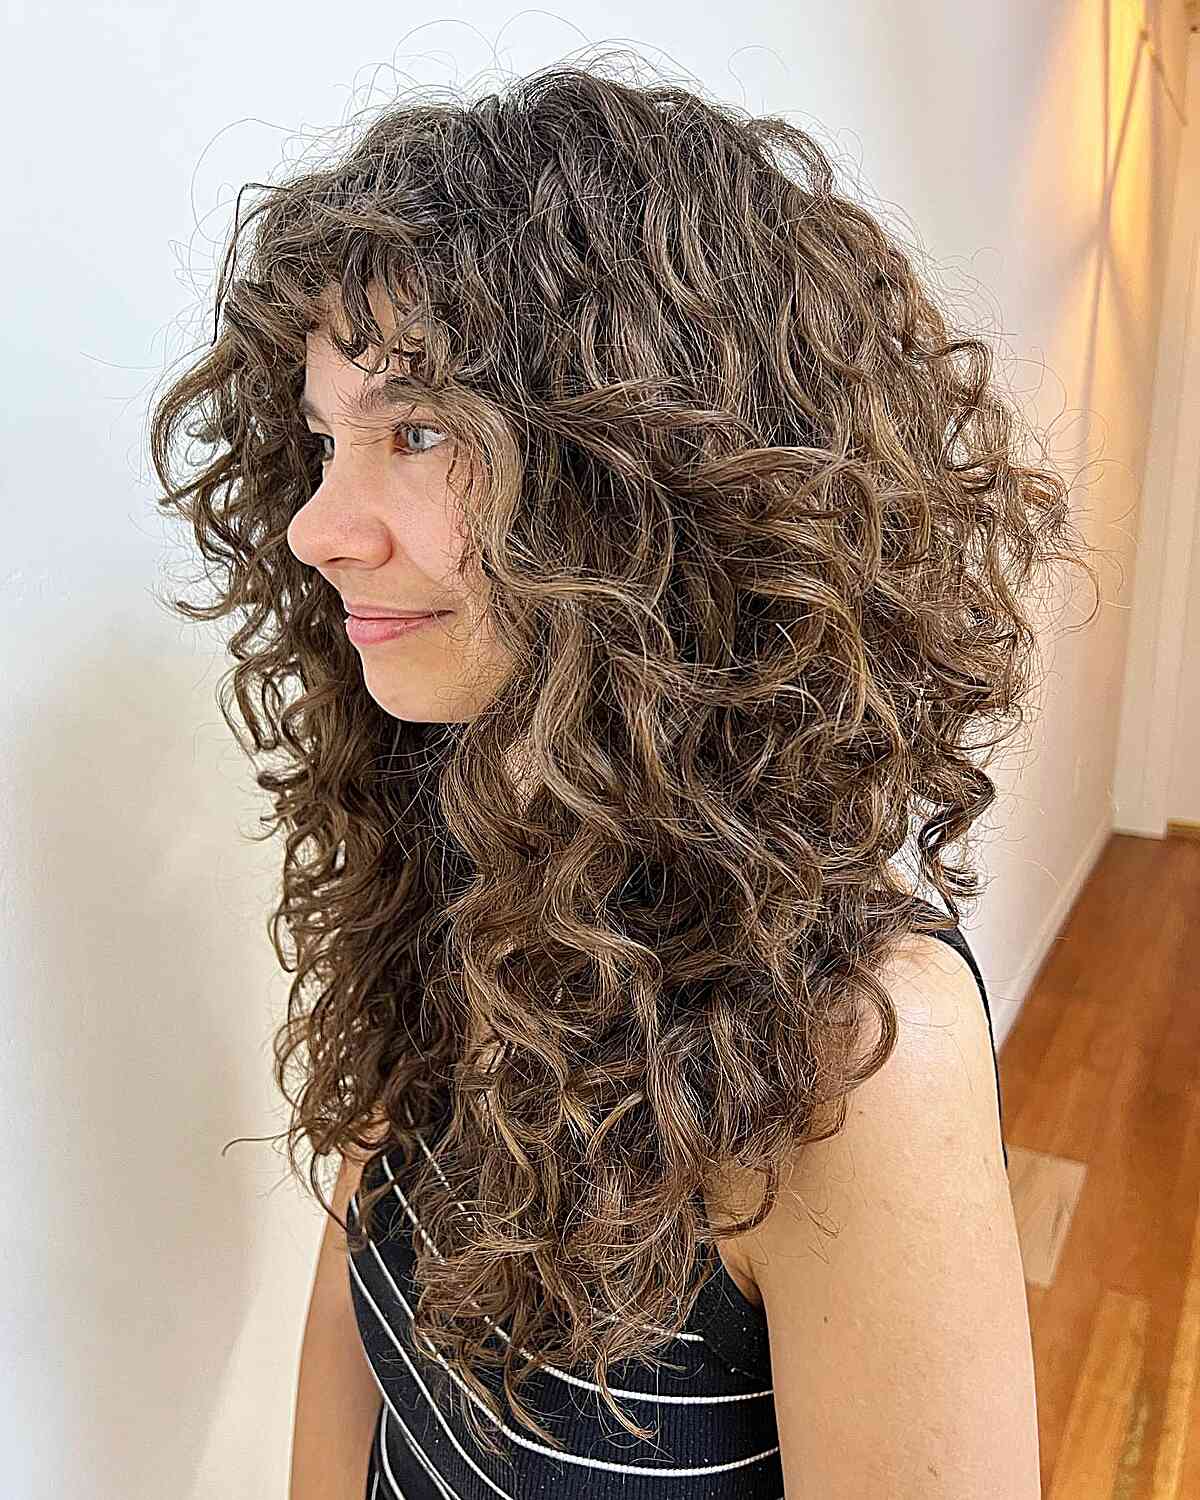 Wild Curls and Layers for women with very thick shaggy hair